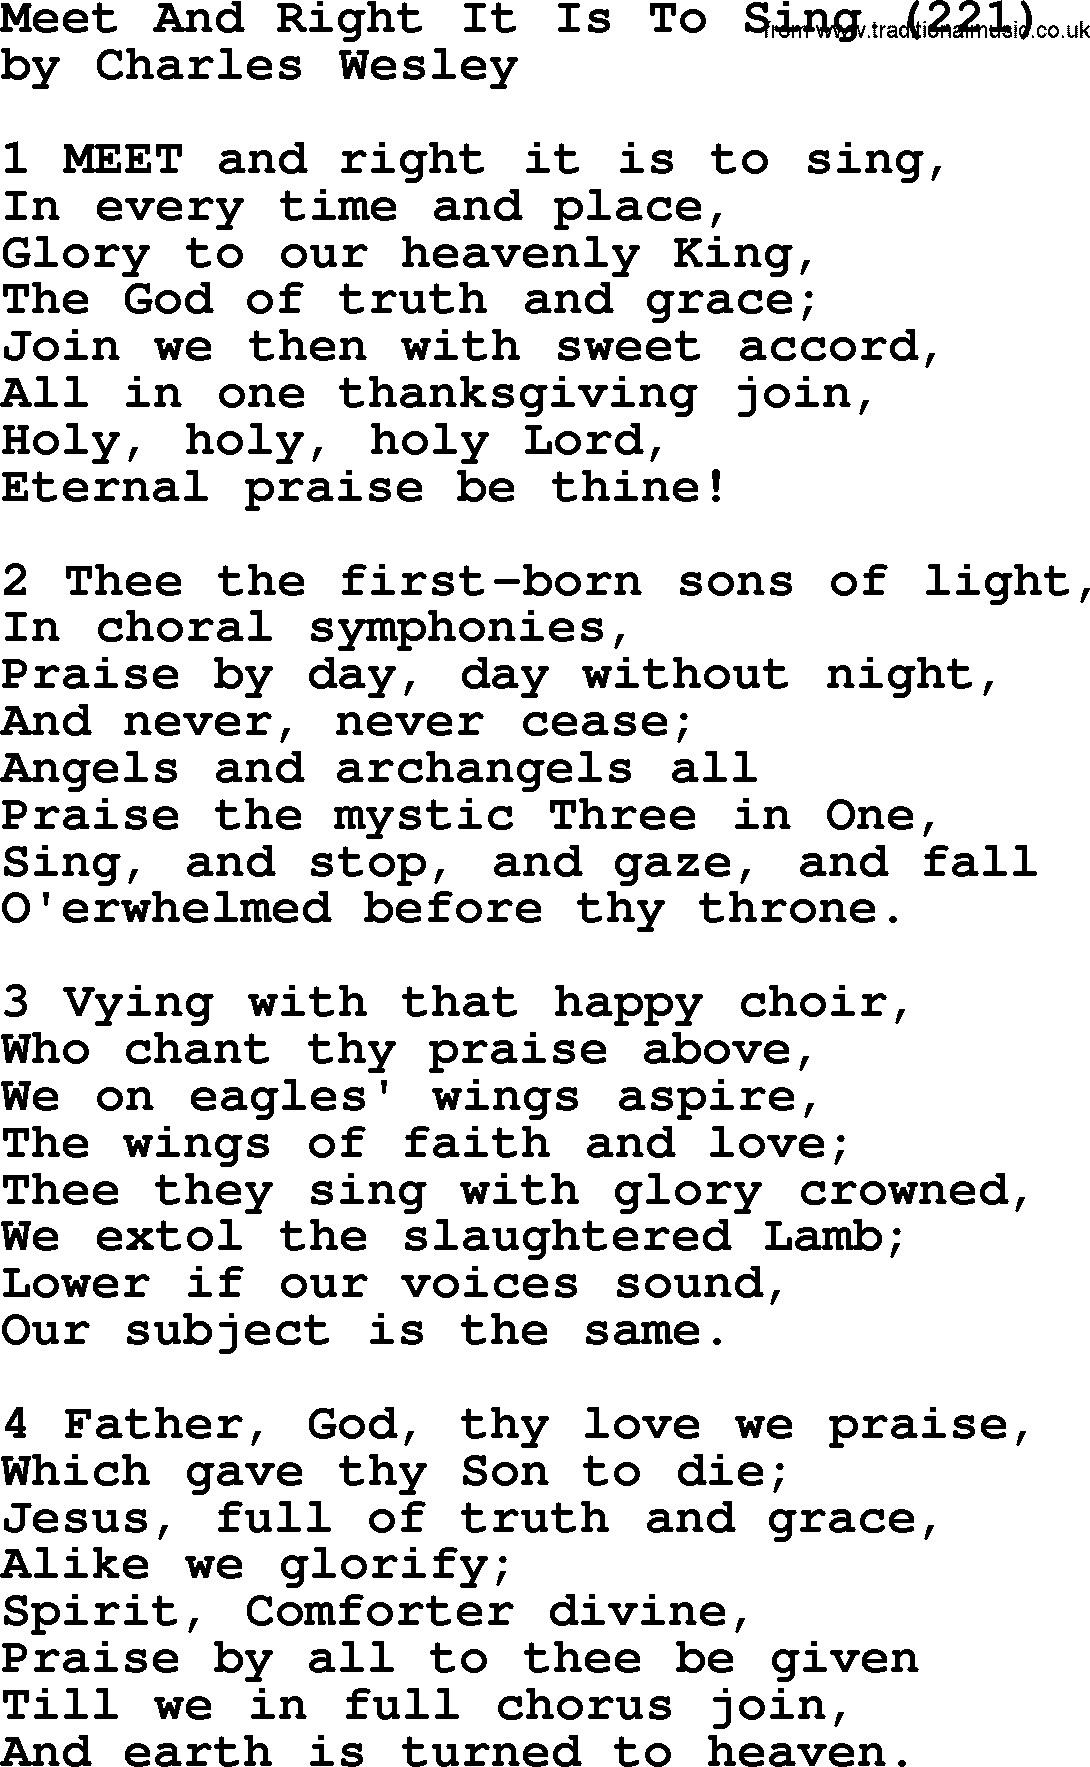 Charles Wesley hymn: Meet And Right It Is To Sing (221), lyrics